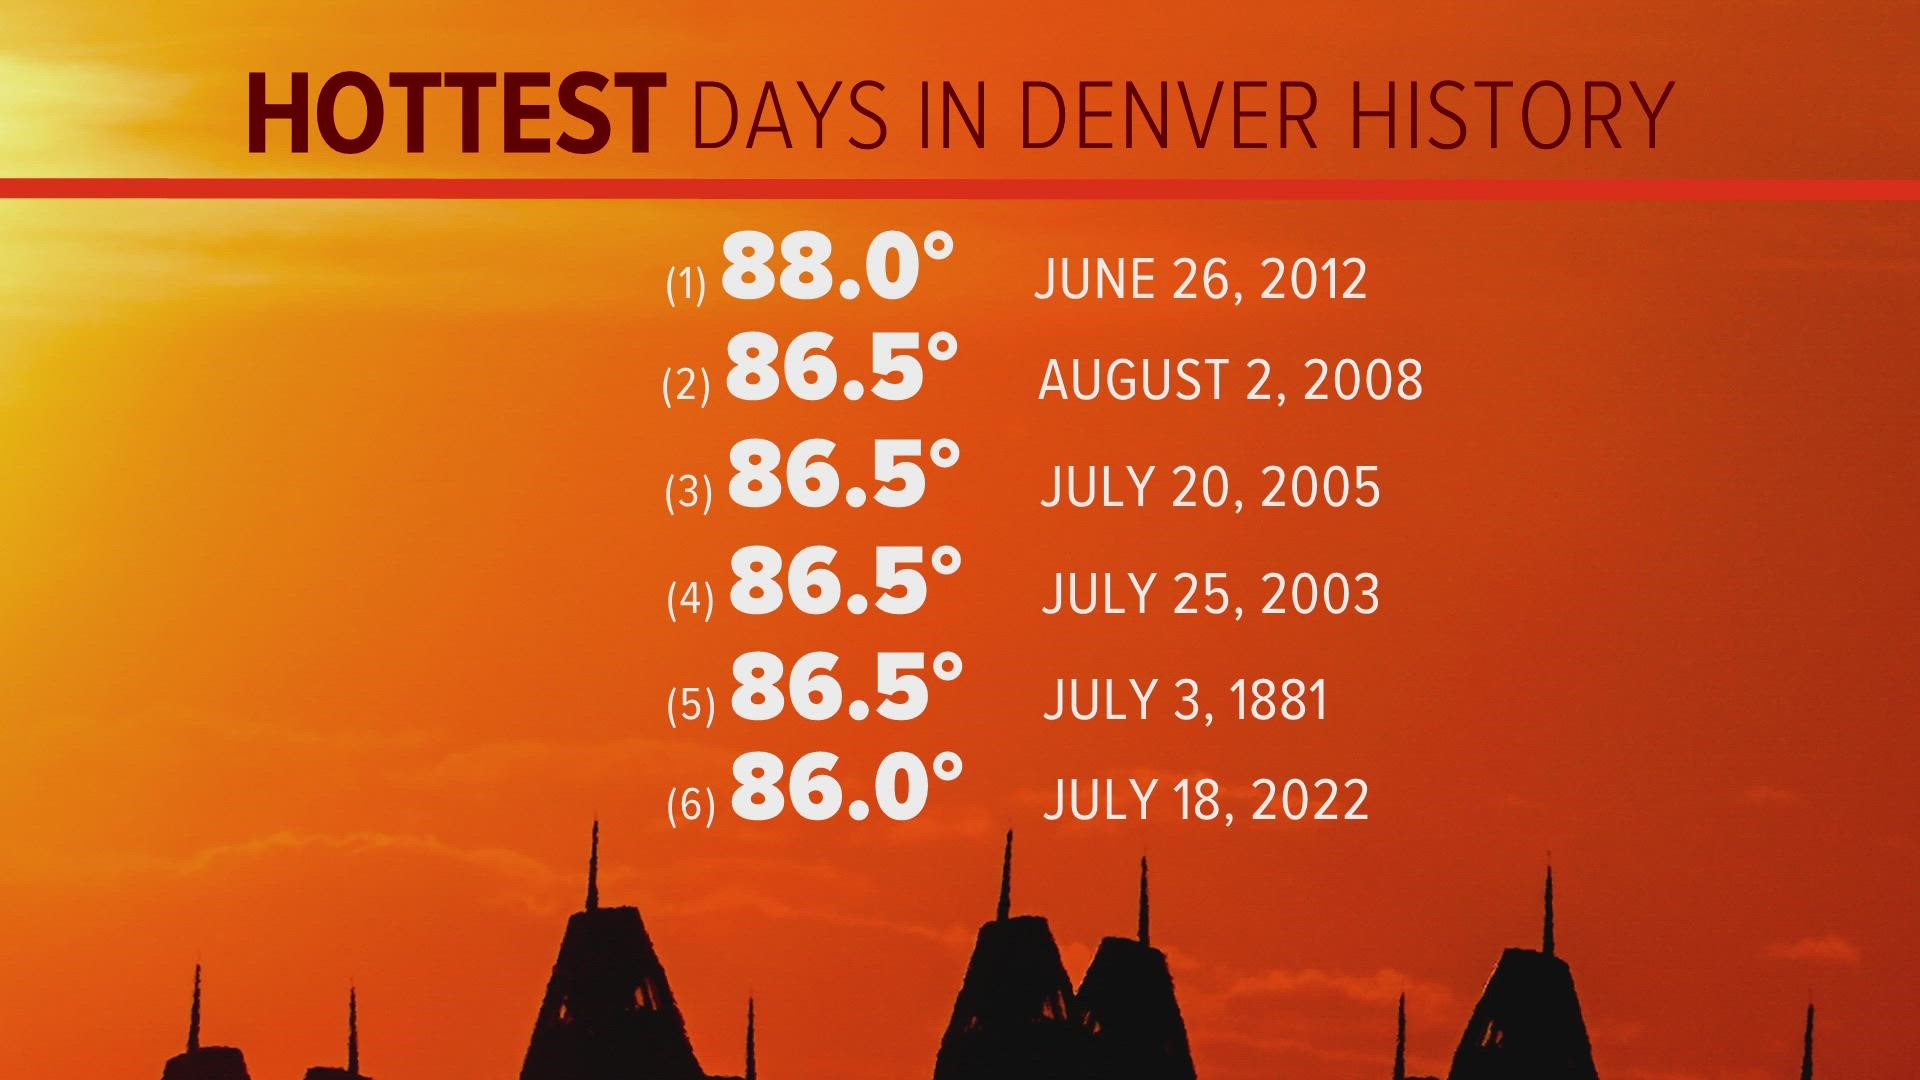 Monday became the sixth hottest day ever in Denver history.